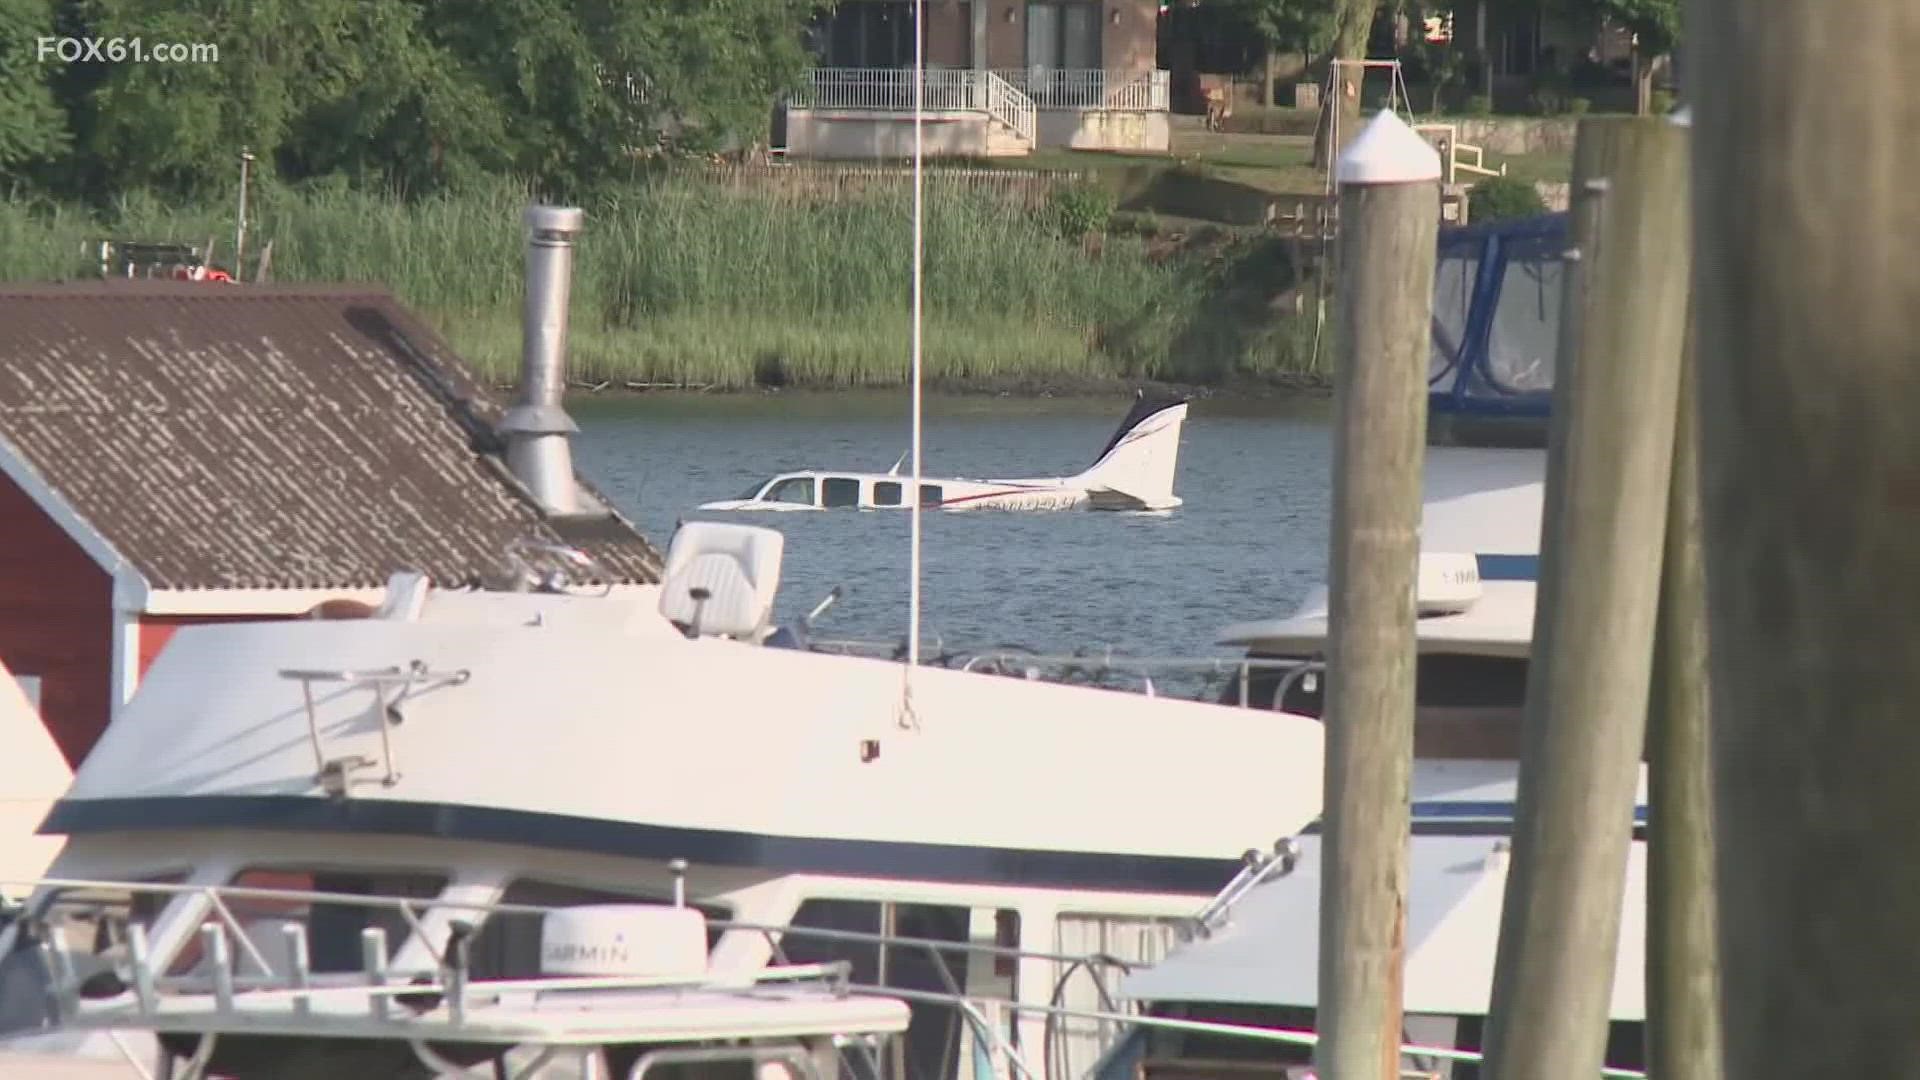 A  Beechcraft Bonanza single engine 6 passenger plane landed in the Quinnipiac river when it was headed toward New Bedford Mass. on Thursday at around 5:30 p.m. the